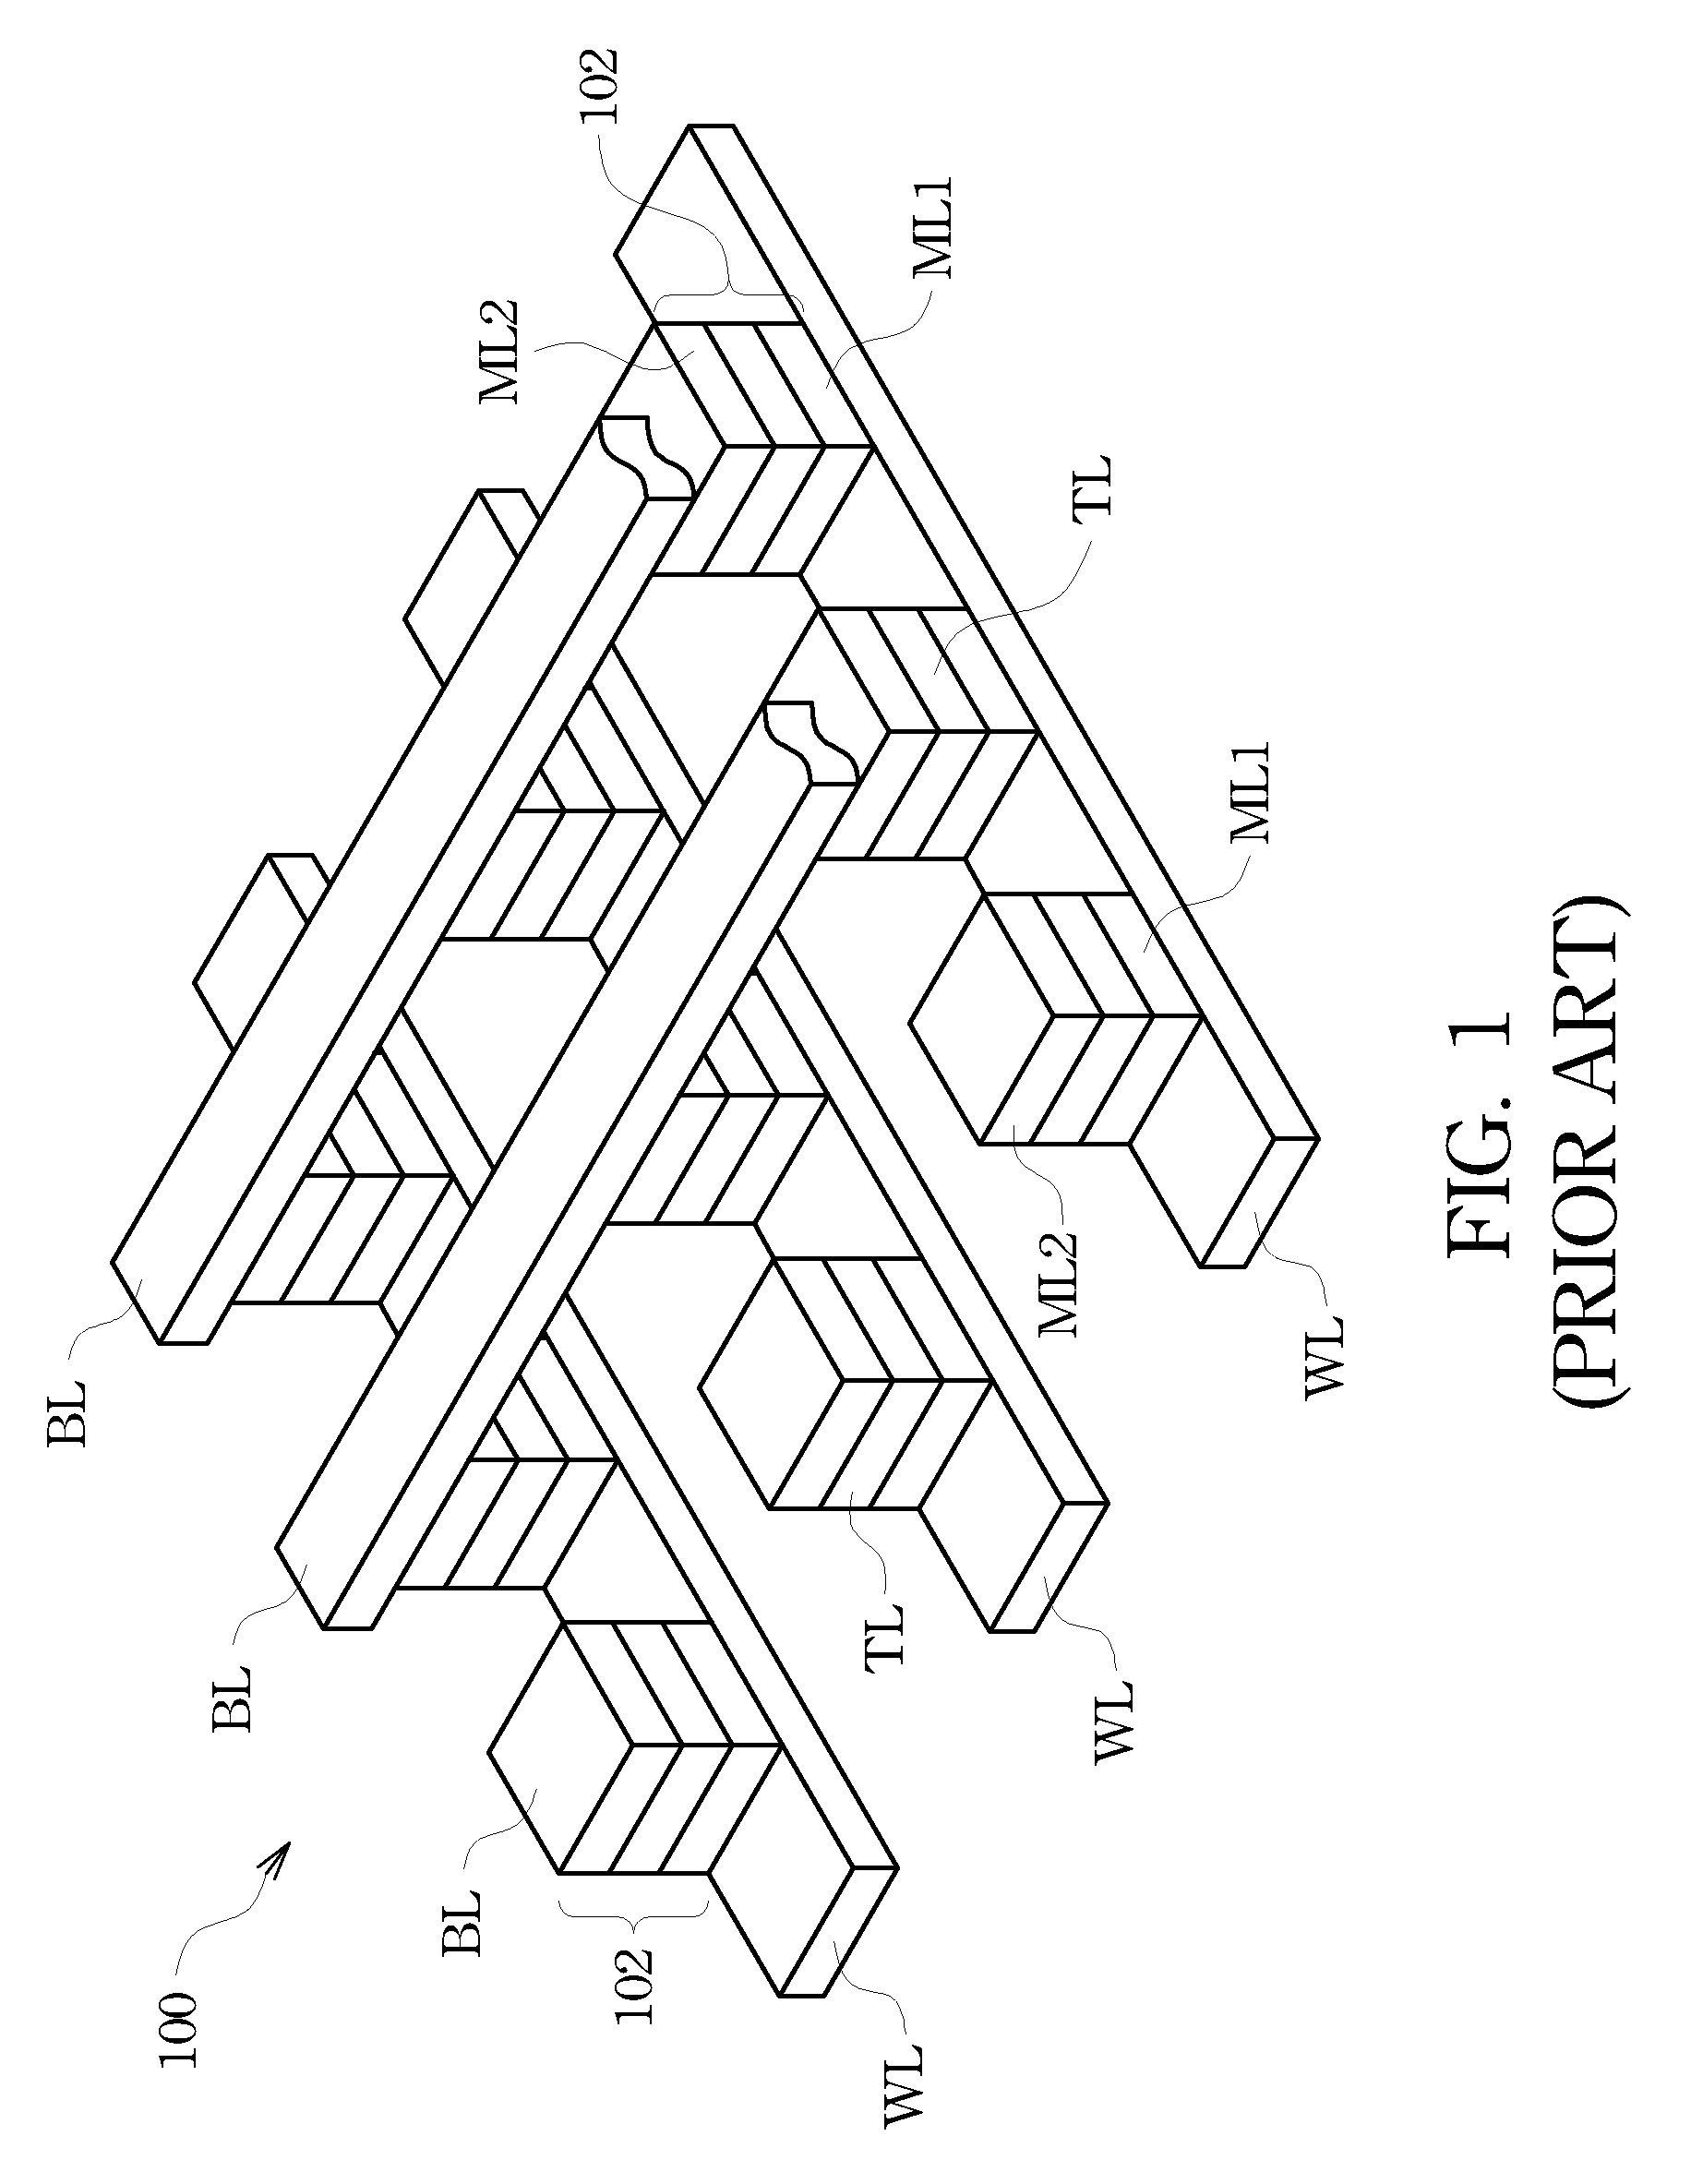 In-Situ Formed Capping Layer in MTJ Devices